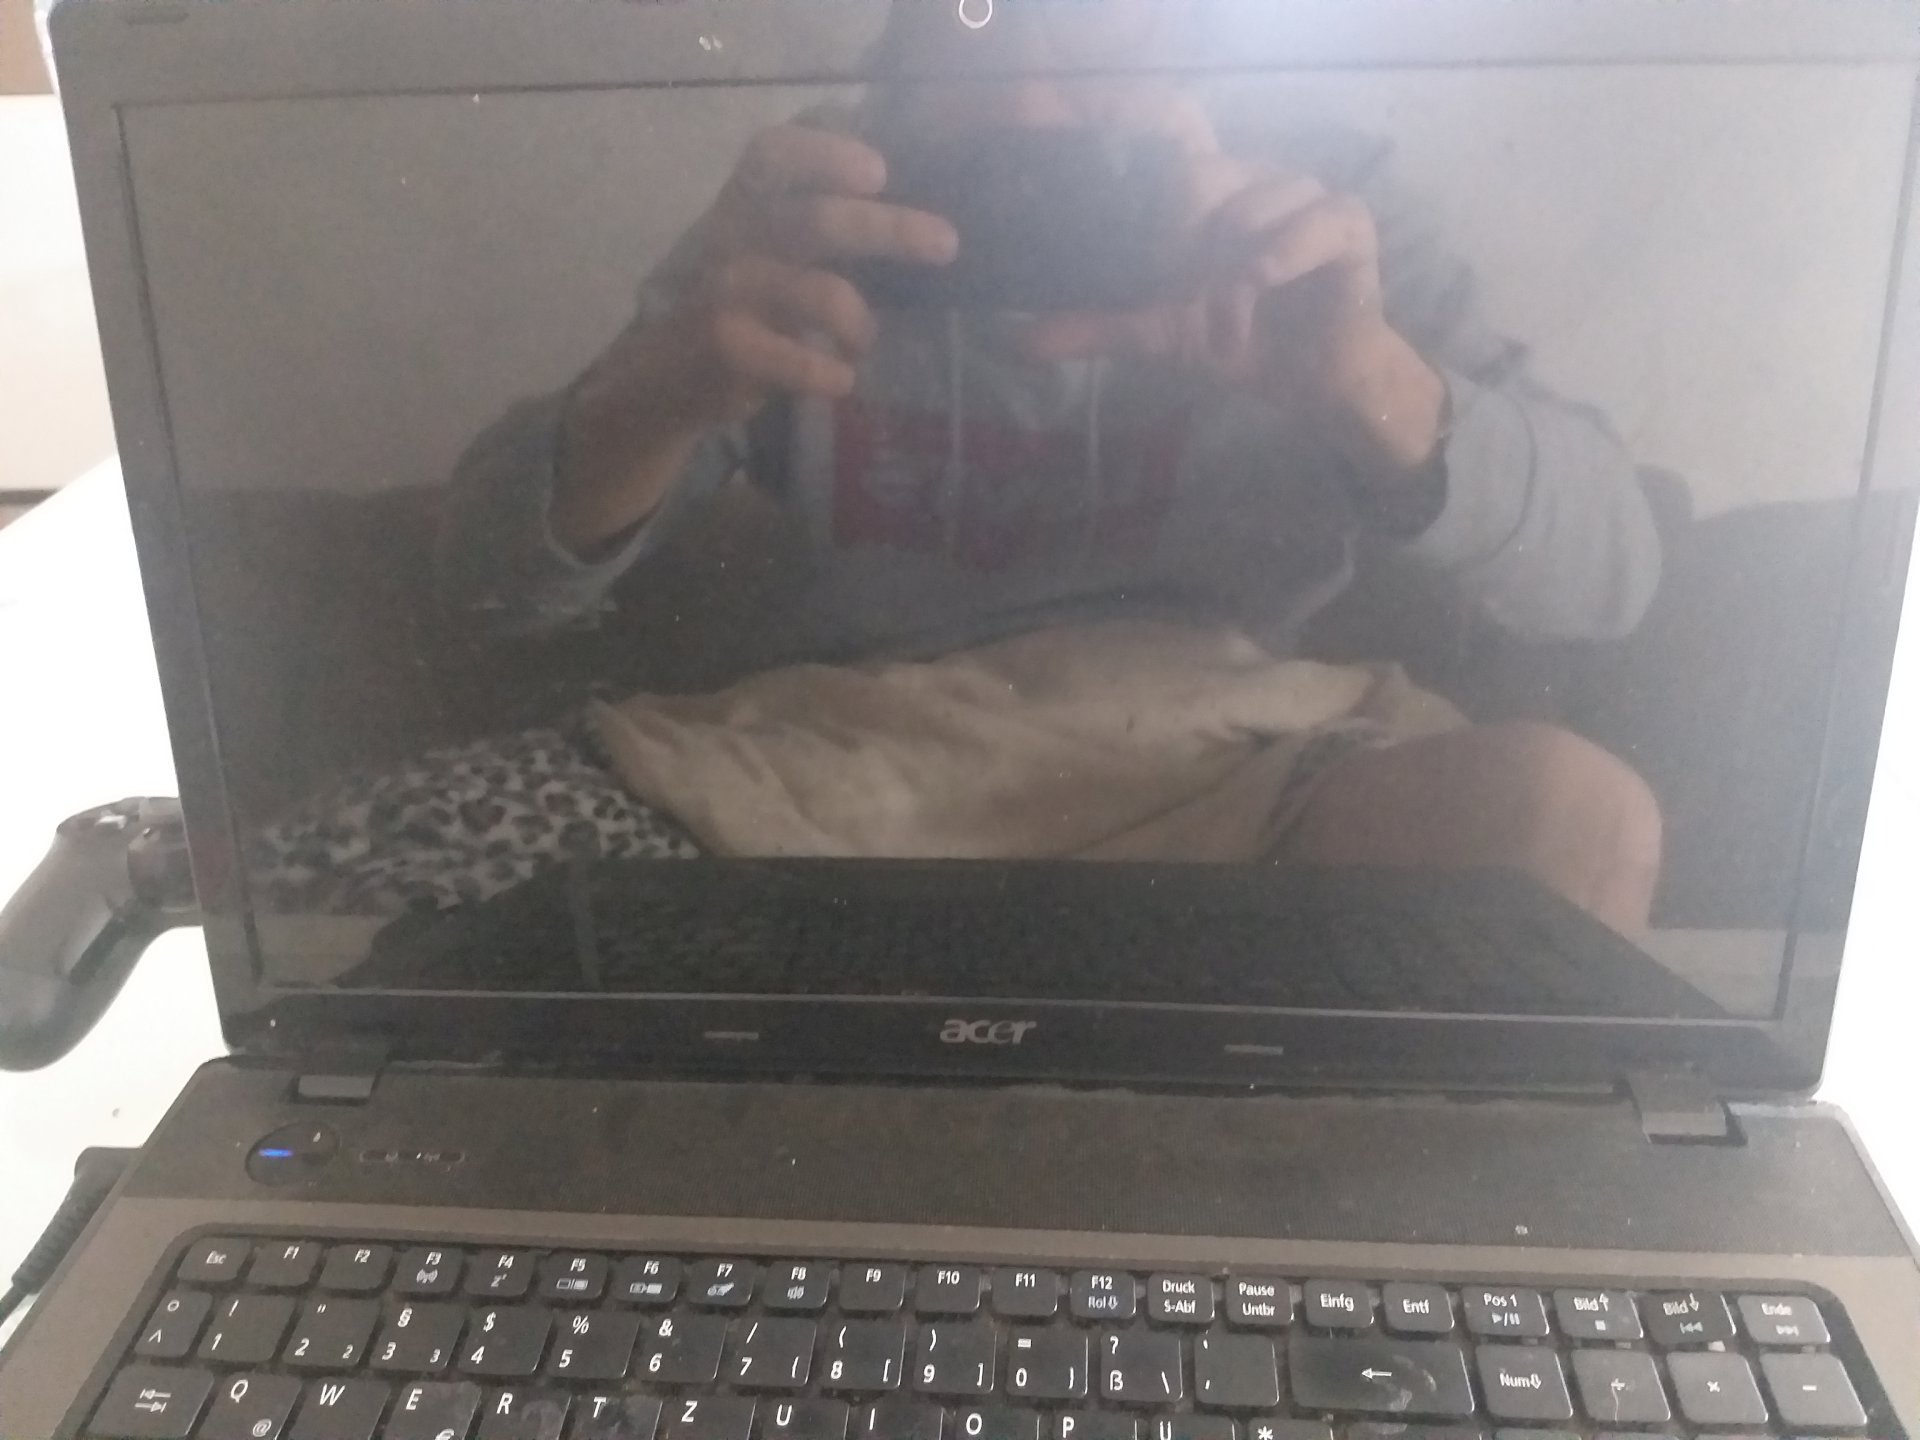 On my laptop, the screen is black suddenly